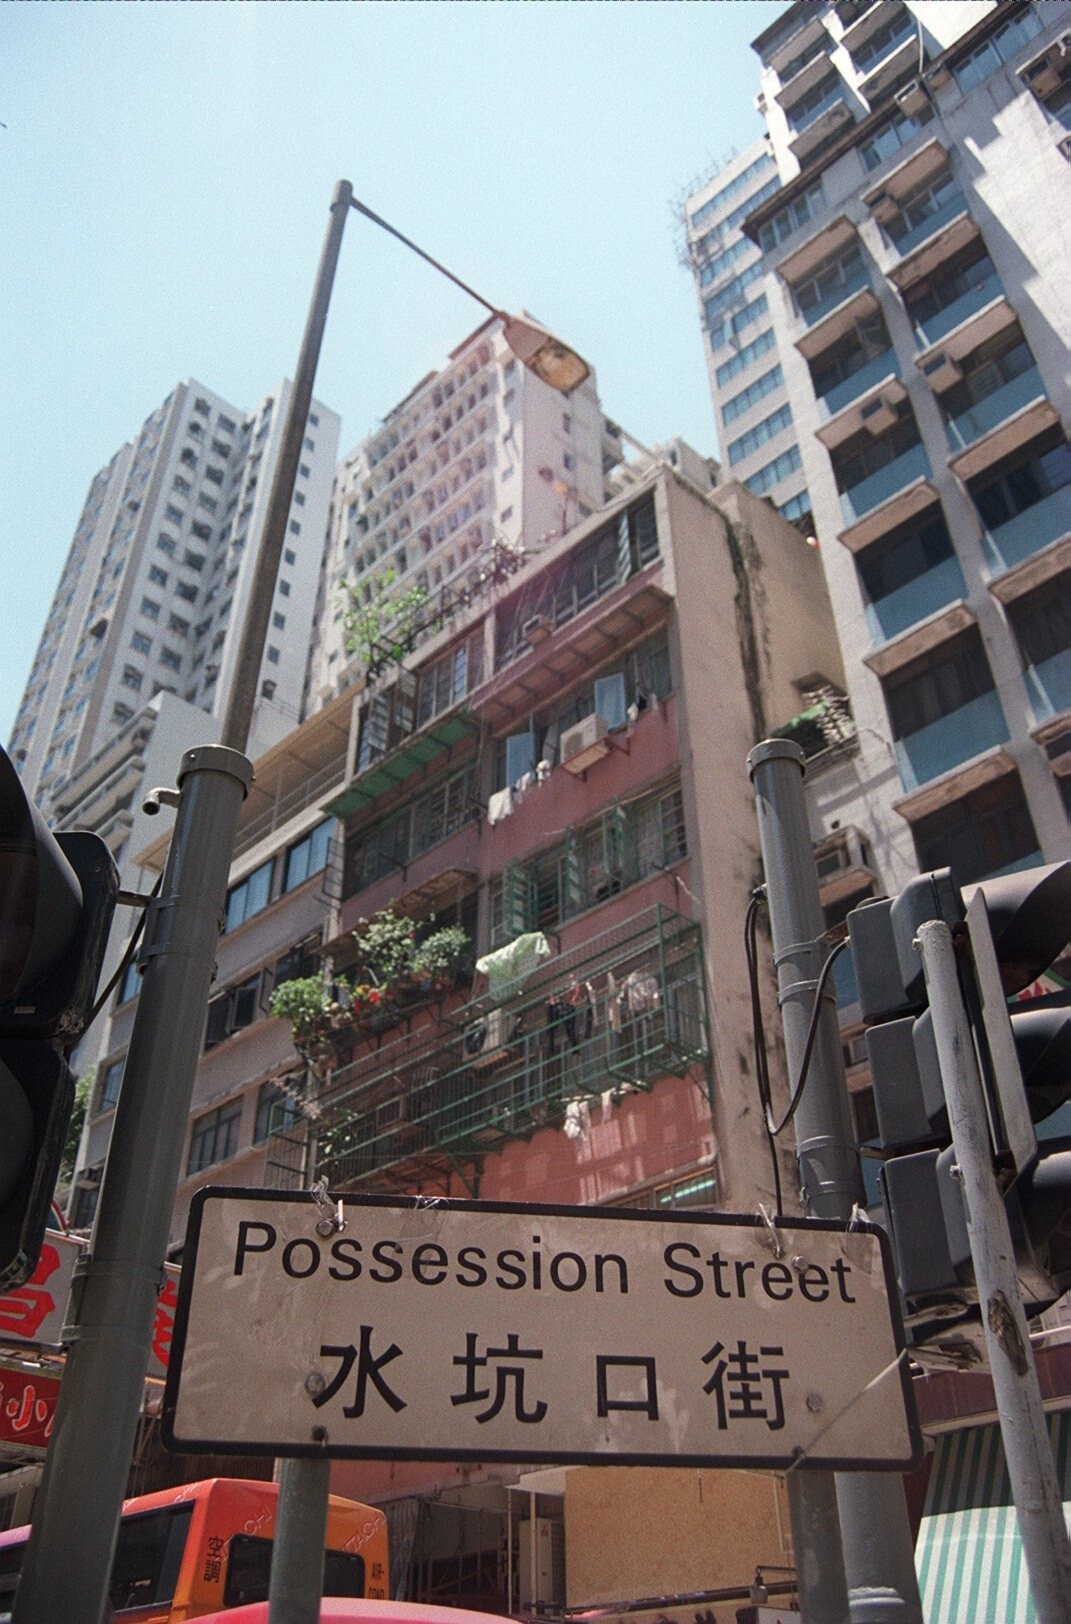 Possession Street in Sheung Wan was once on the waterfront, near the point where the British navy arrived in 1841 and took possession of Hong Kong. Photo: Kylie Ashe